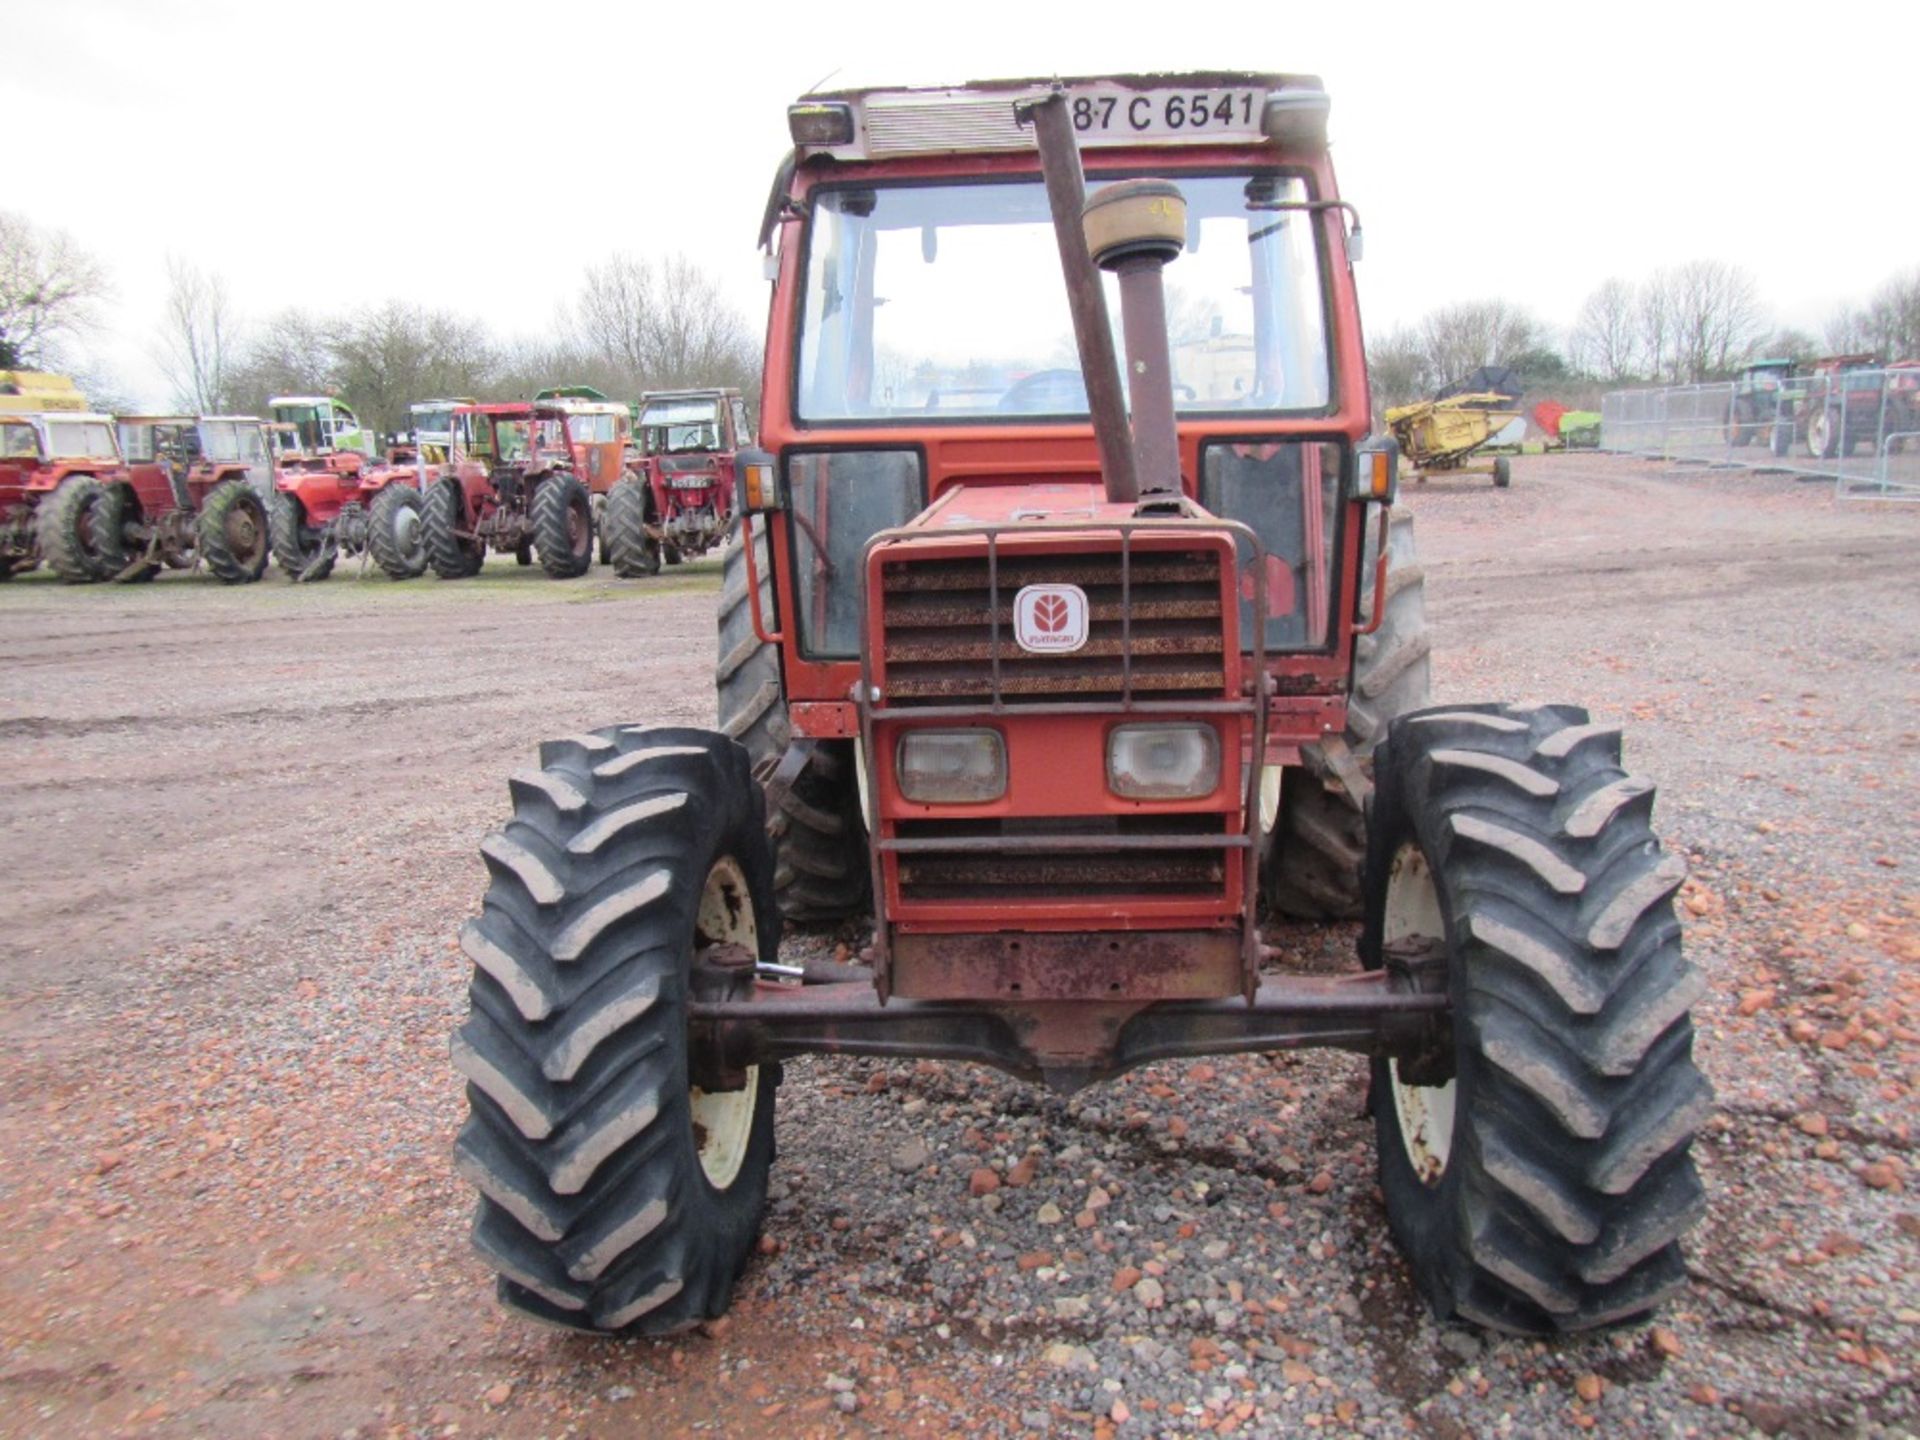 Fiat 100-90 4wd Tractor. Ser. No. 339880 - Image 3 of 14